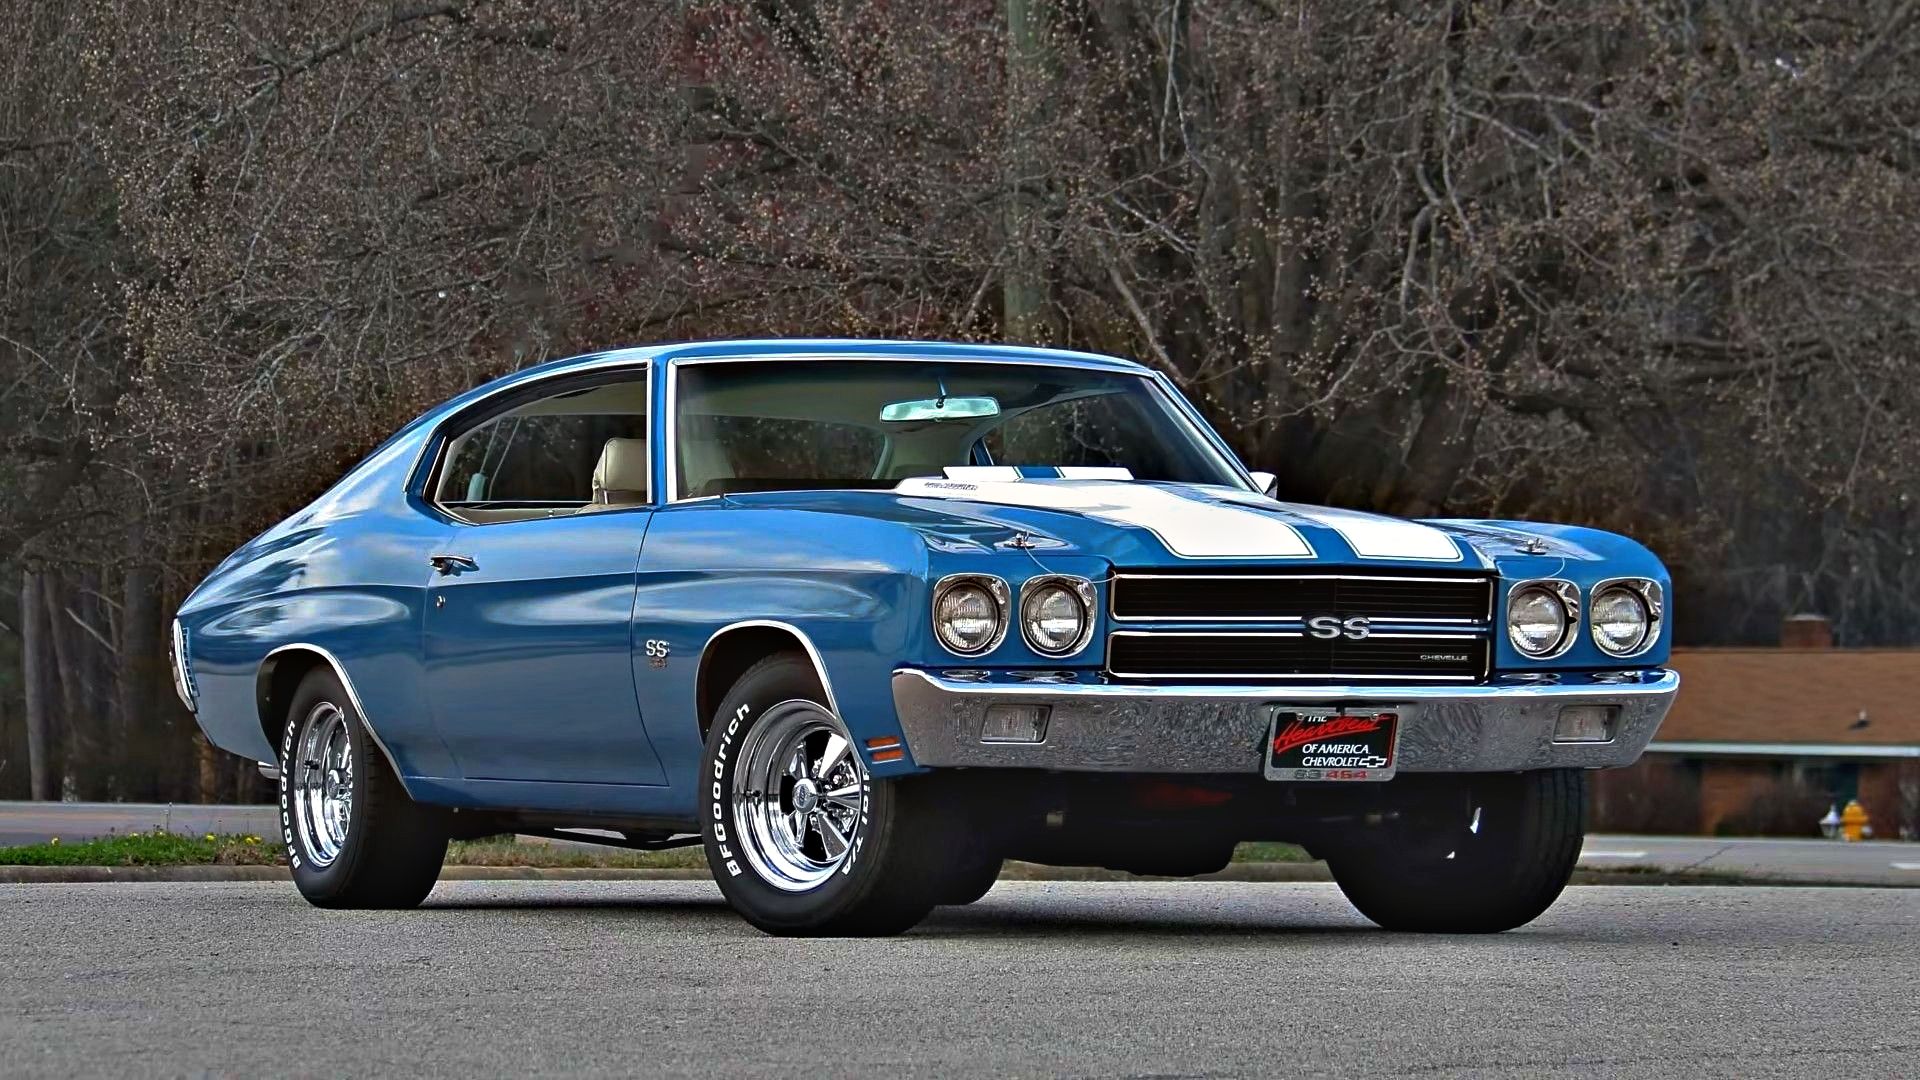 Blue Chevy Chevelle SS 454